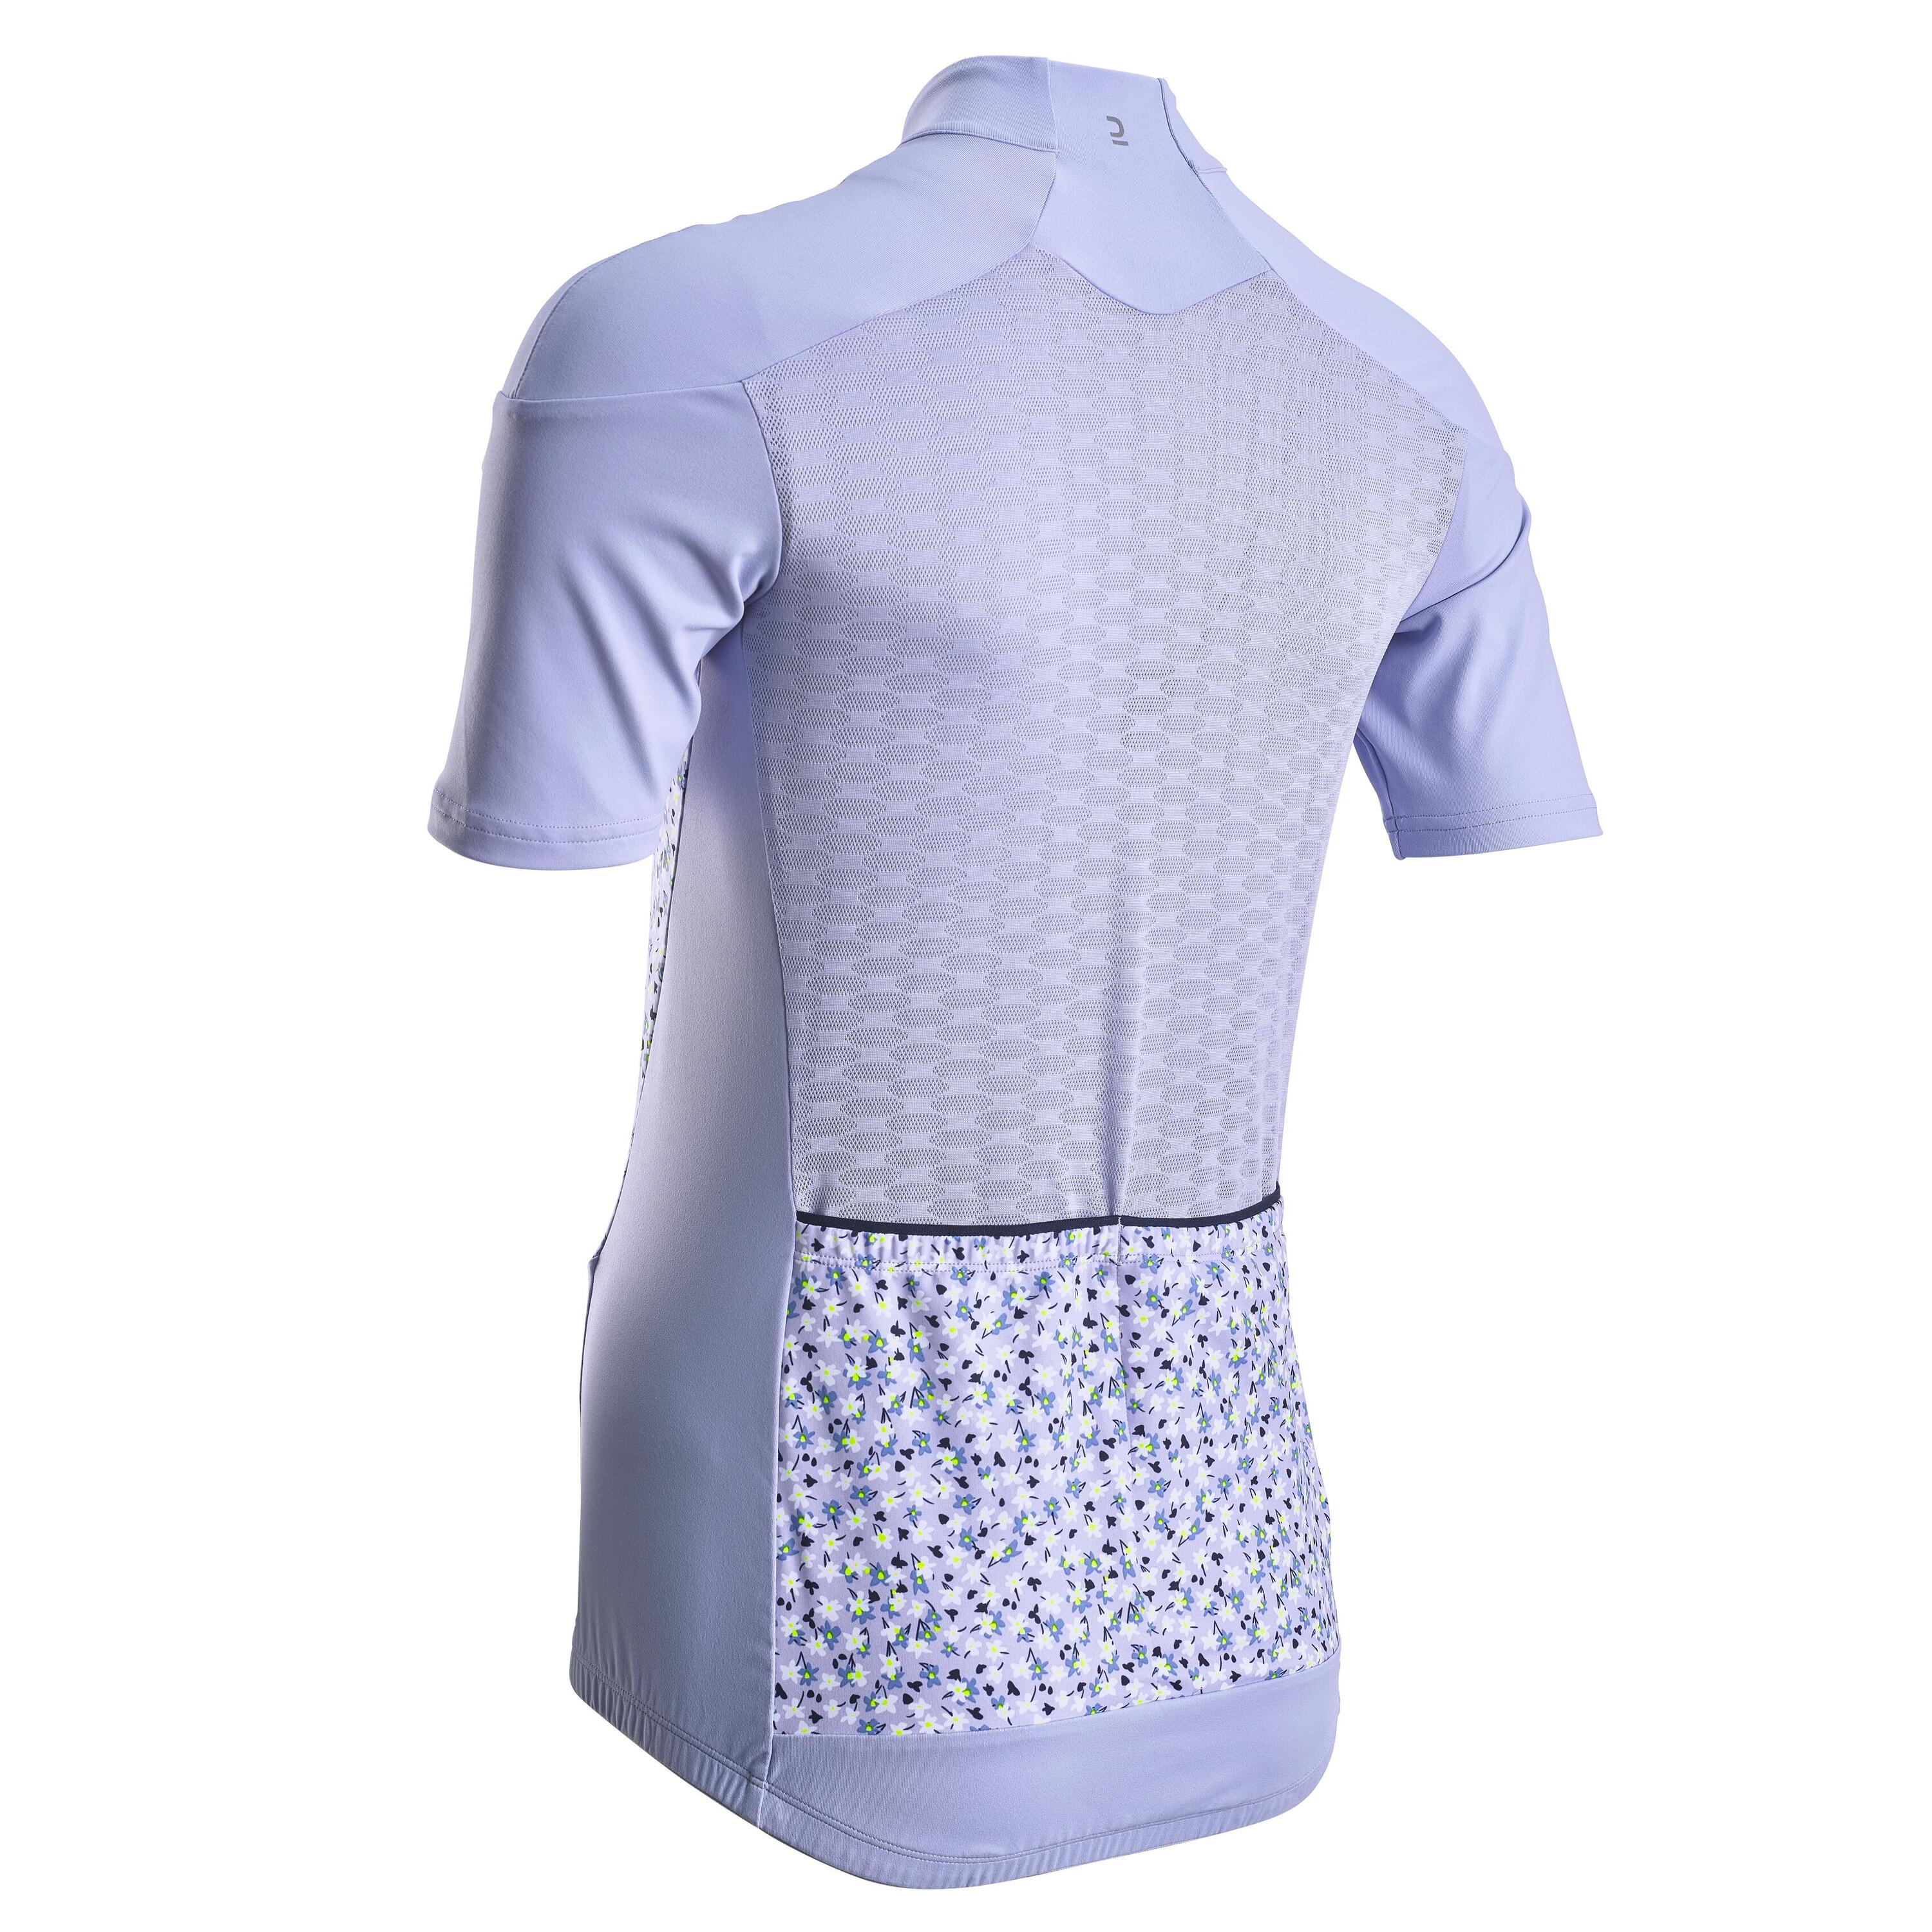 Women's Short-Sleeved Road Cycling Jersey RC500 - Floral/Lavender 2/7